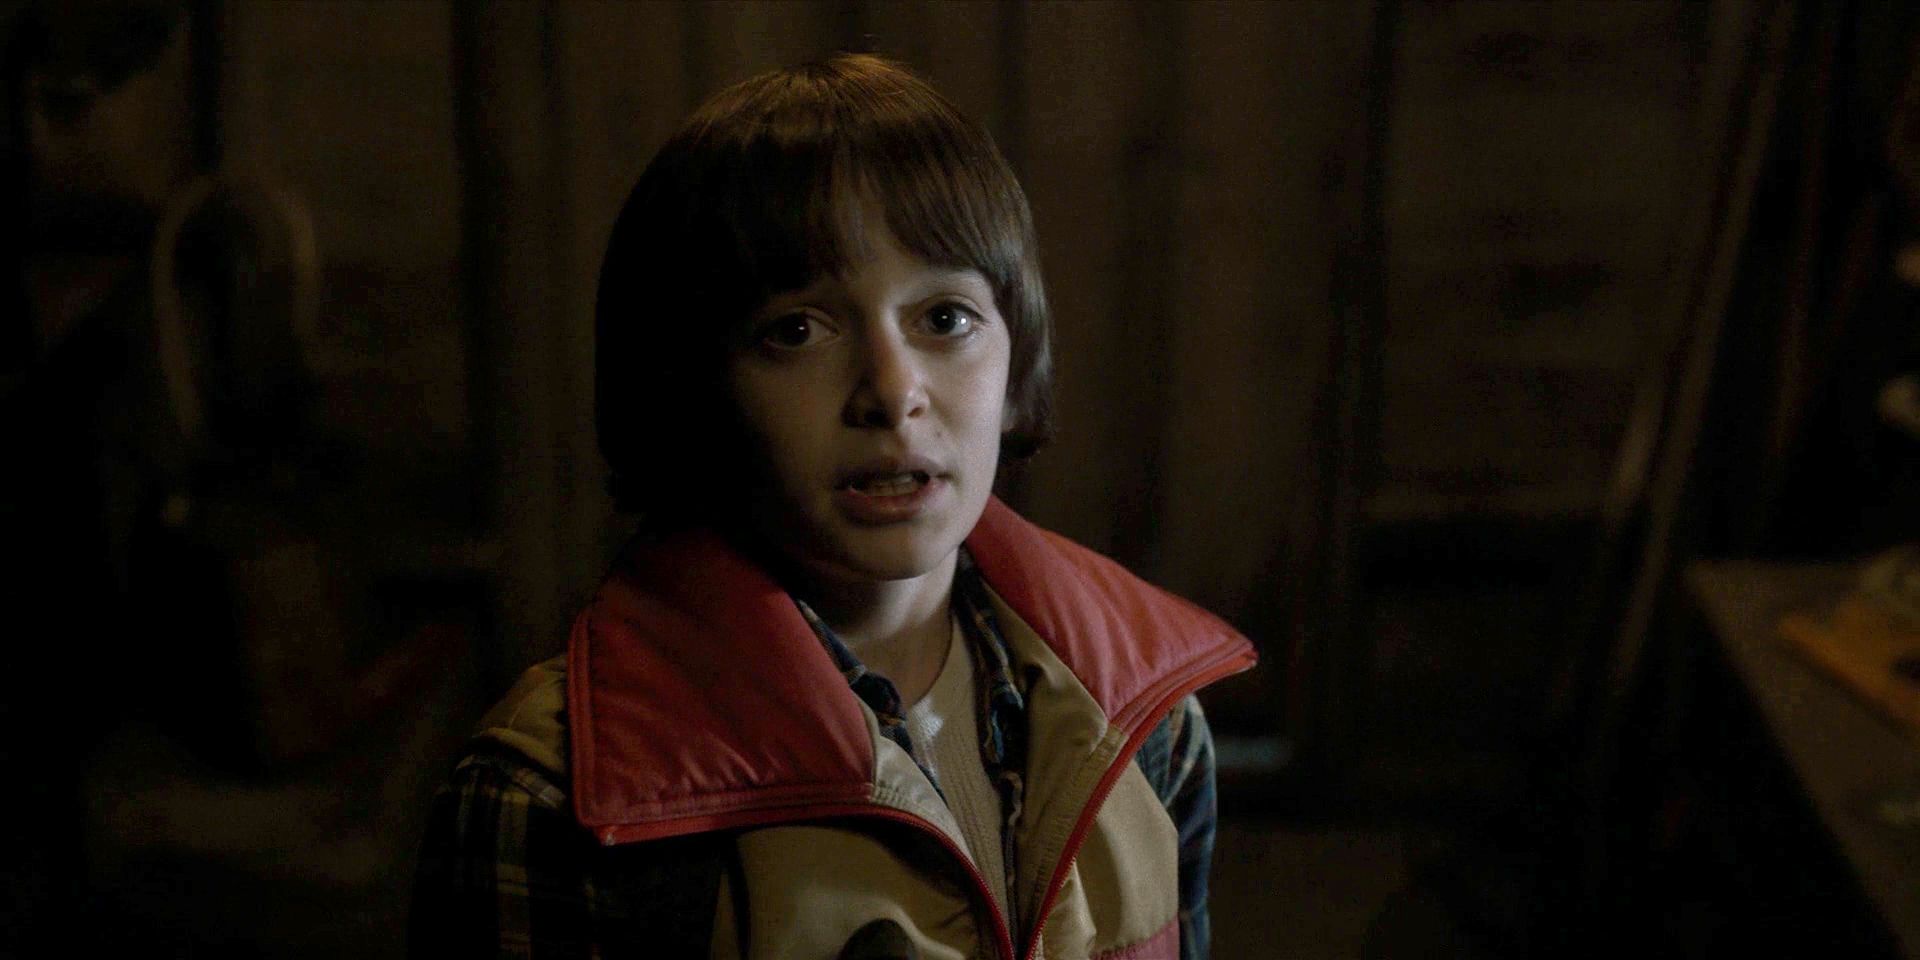 Stranger Things Season 1 Episode 1 Will is being stalked by the Demogorgon